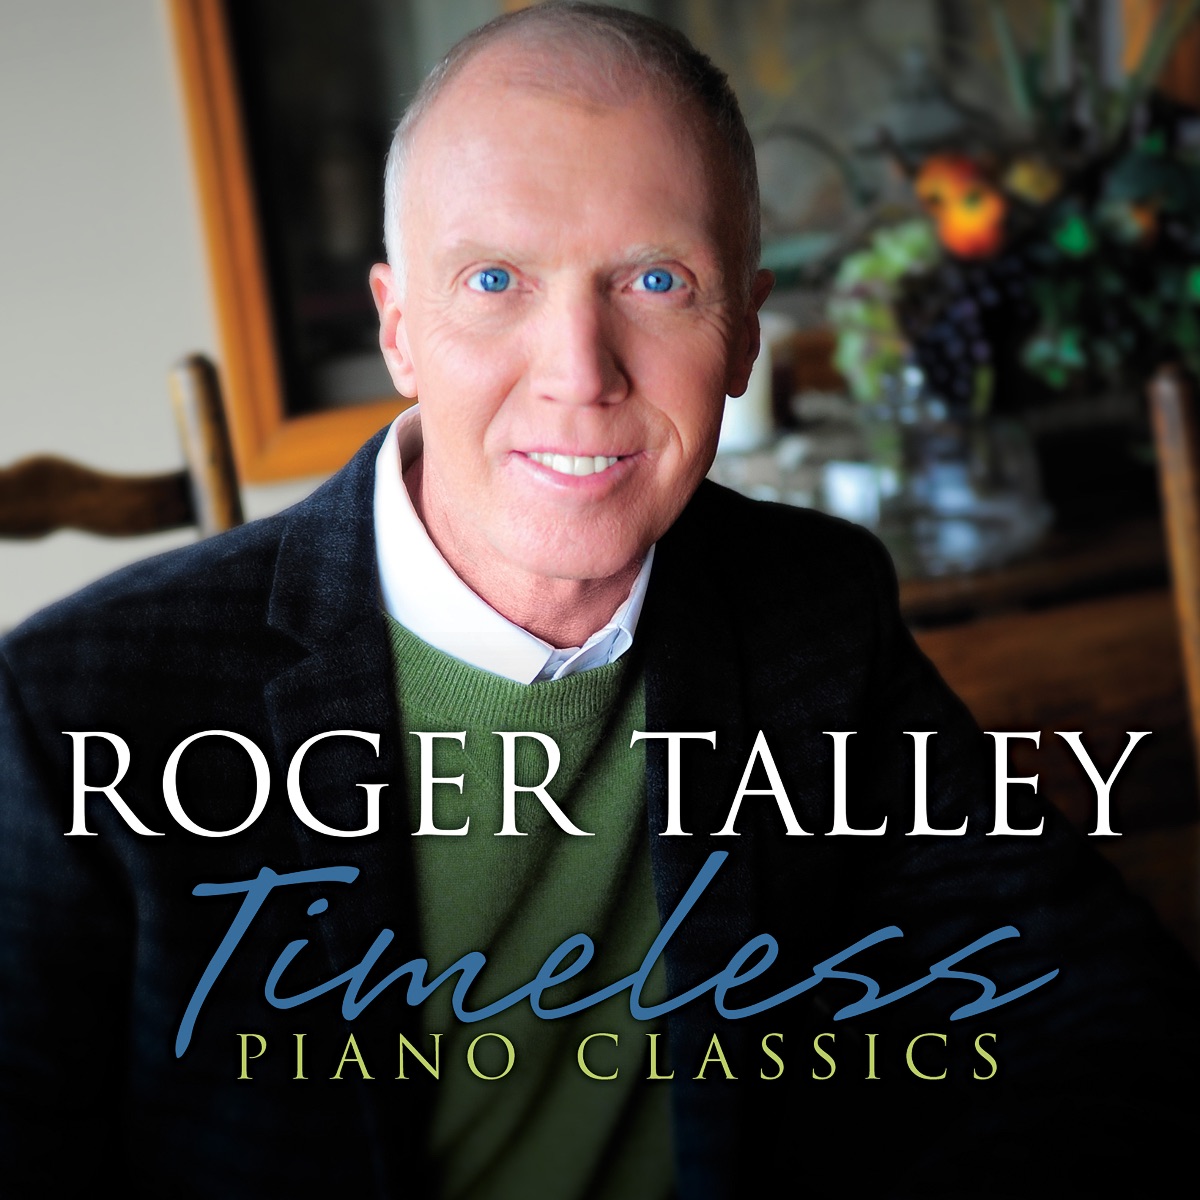 Roger Talley devotes his talents to beloved hymns on Timeless Piano Classics